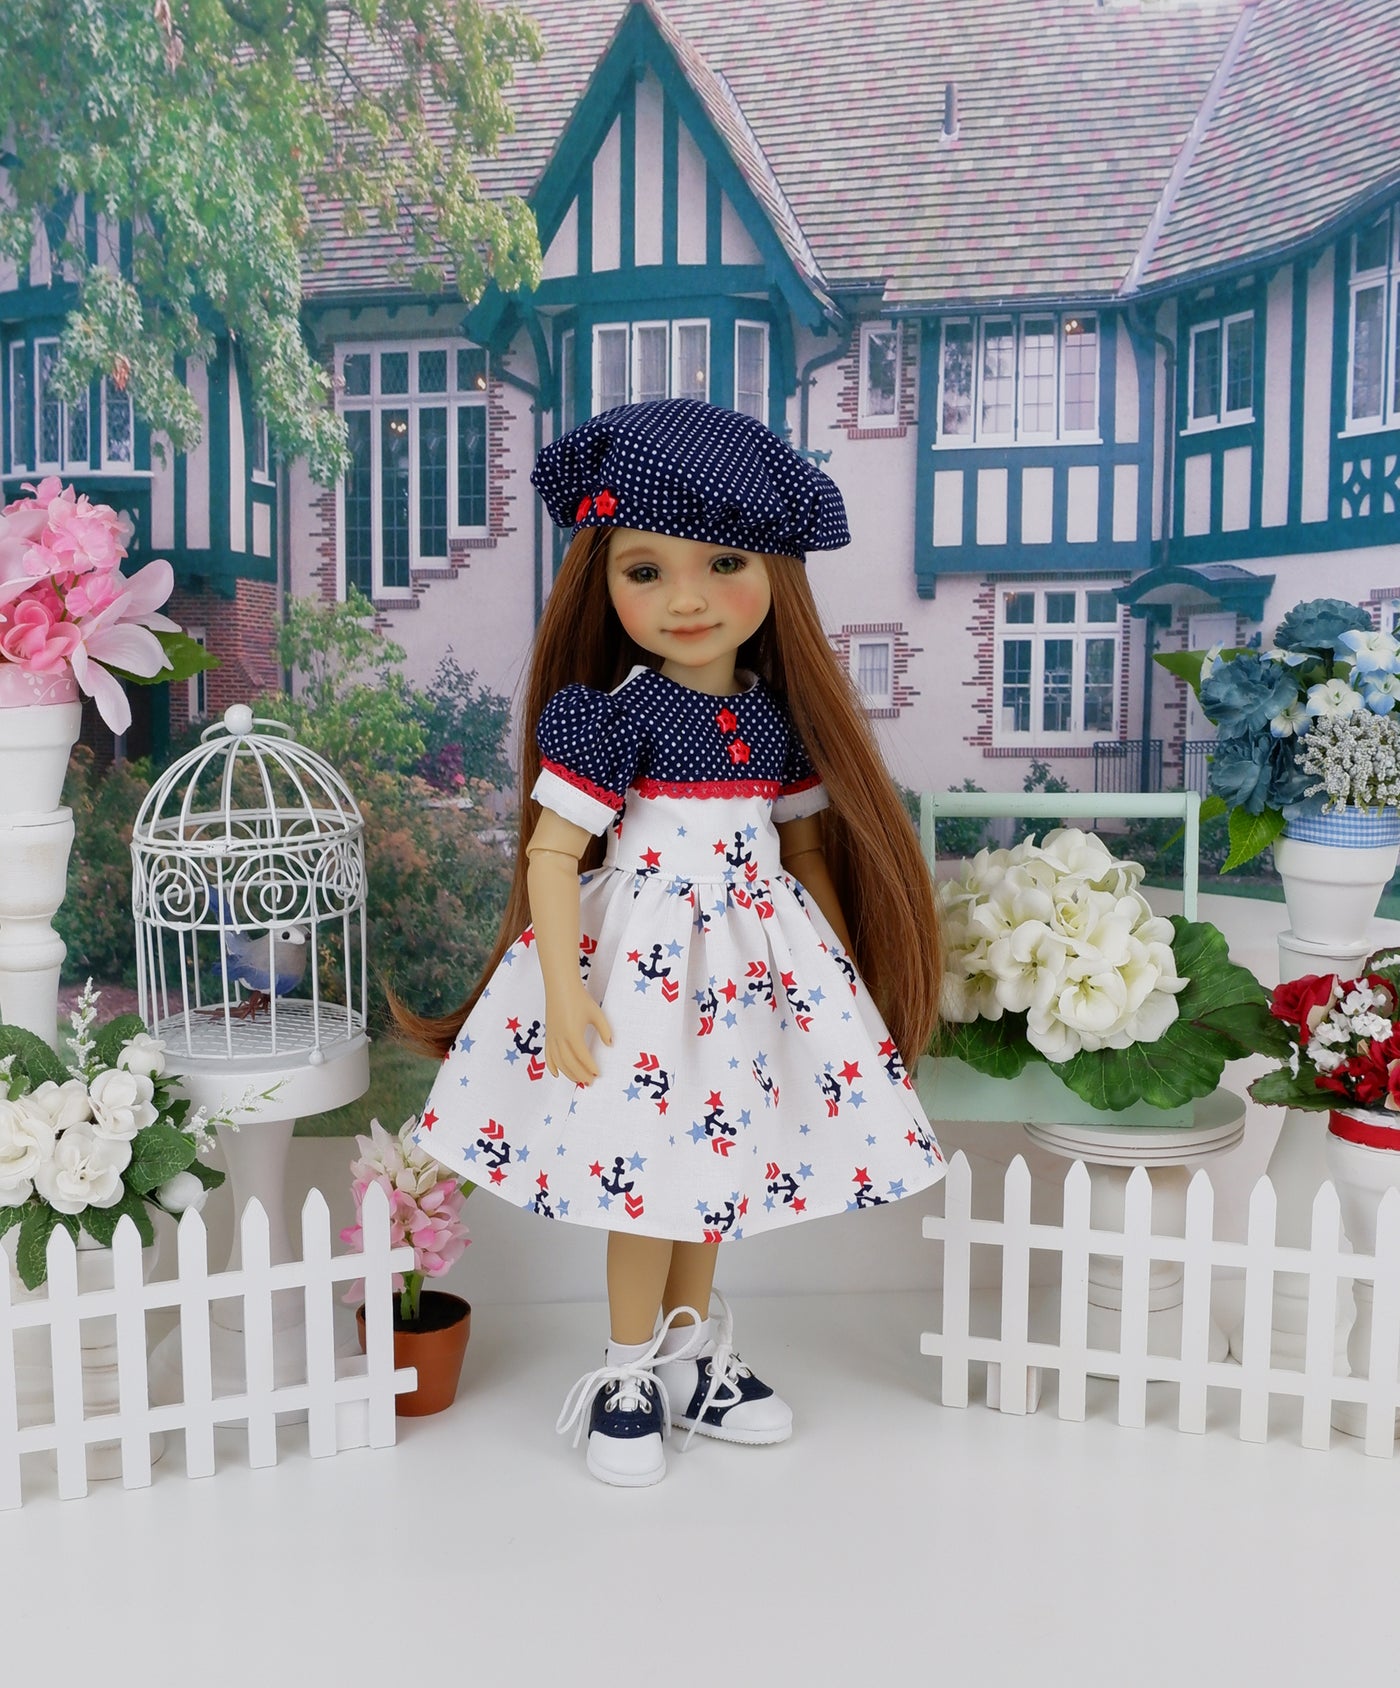 Seas the Day - dress and saddle shoes for Ruby Red Fashion Friends doll